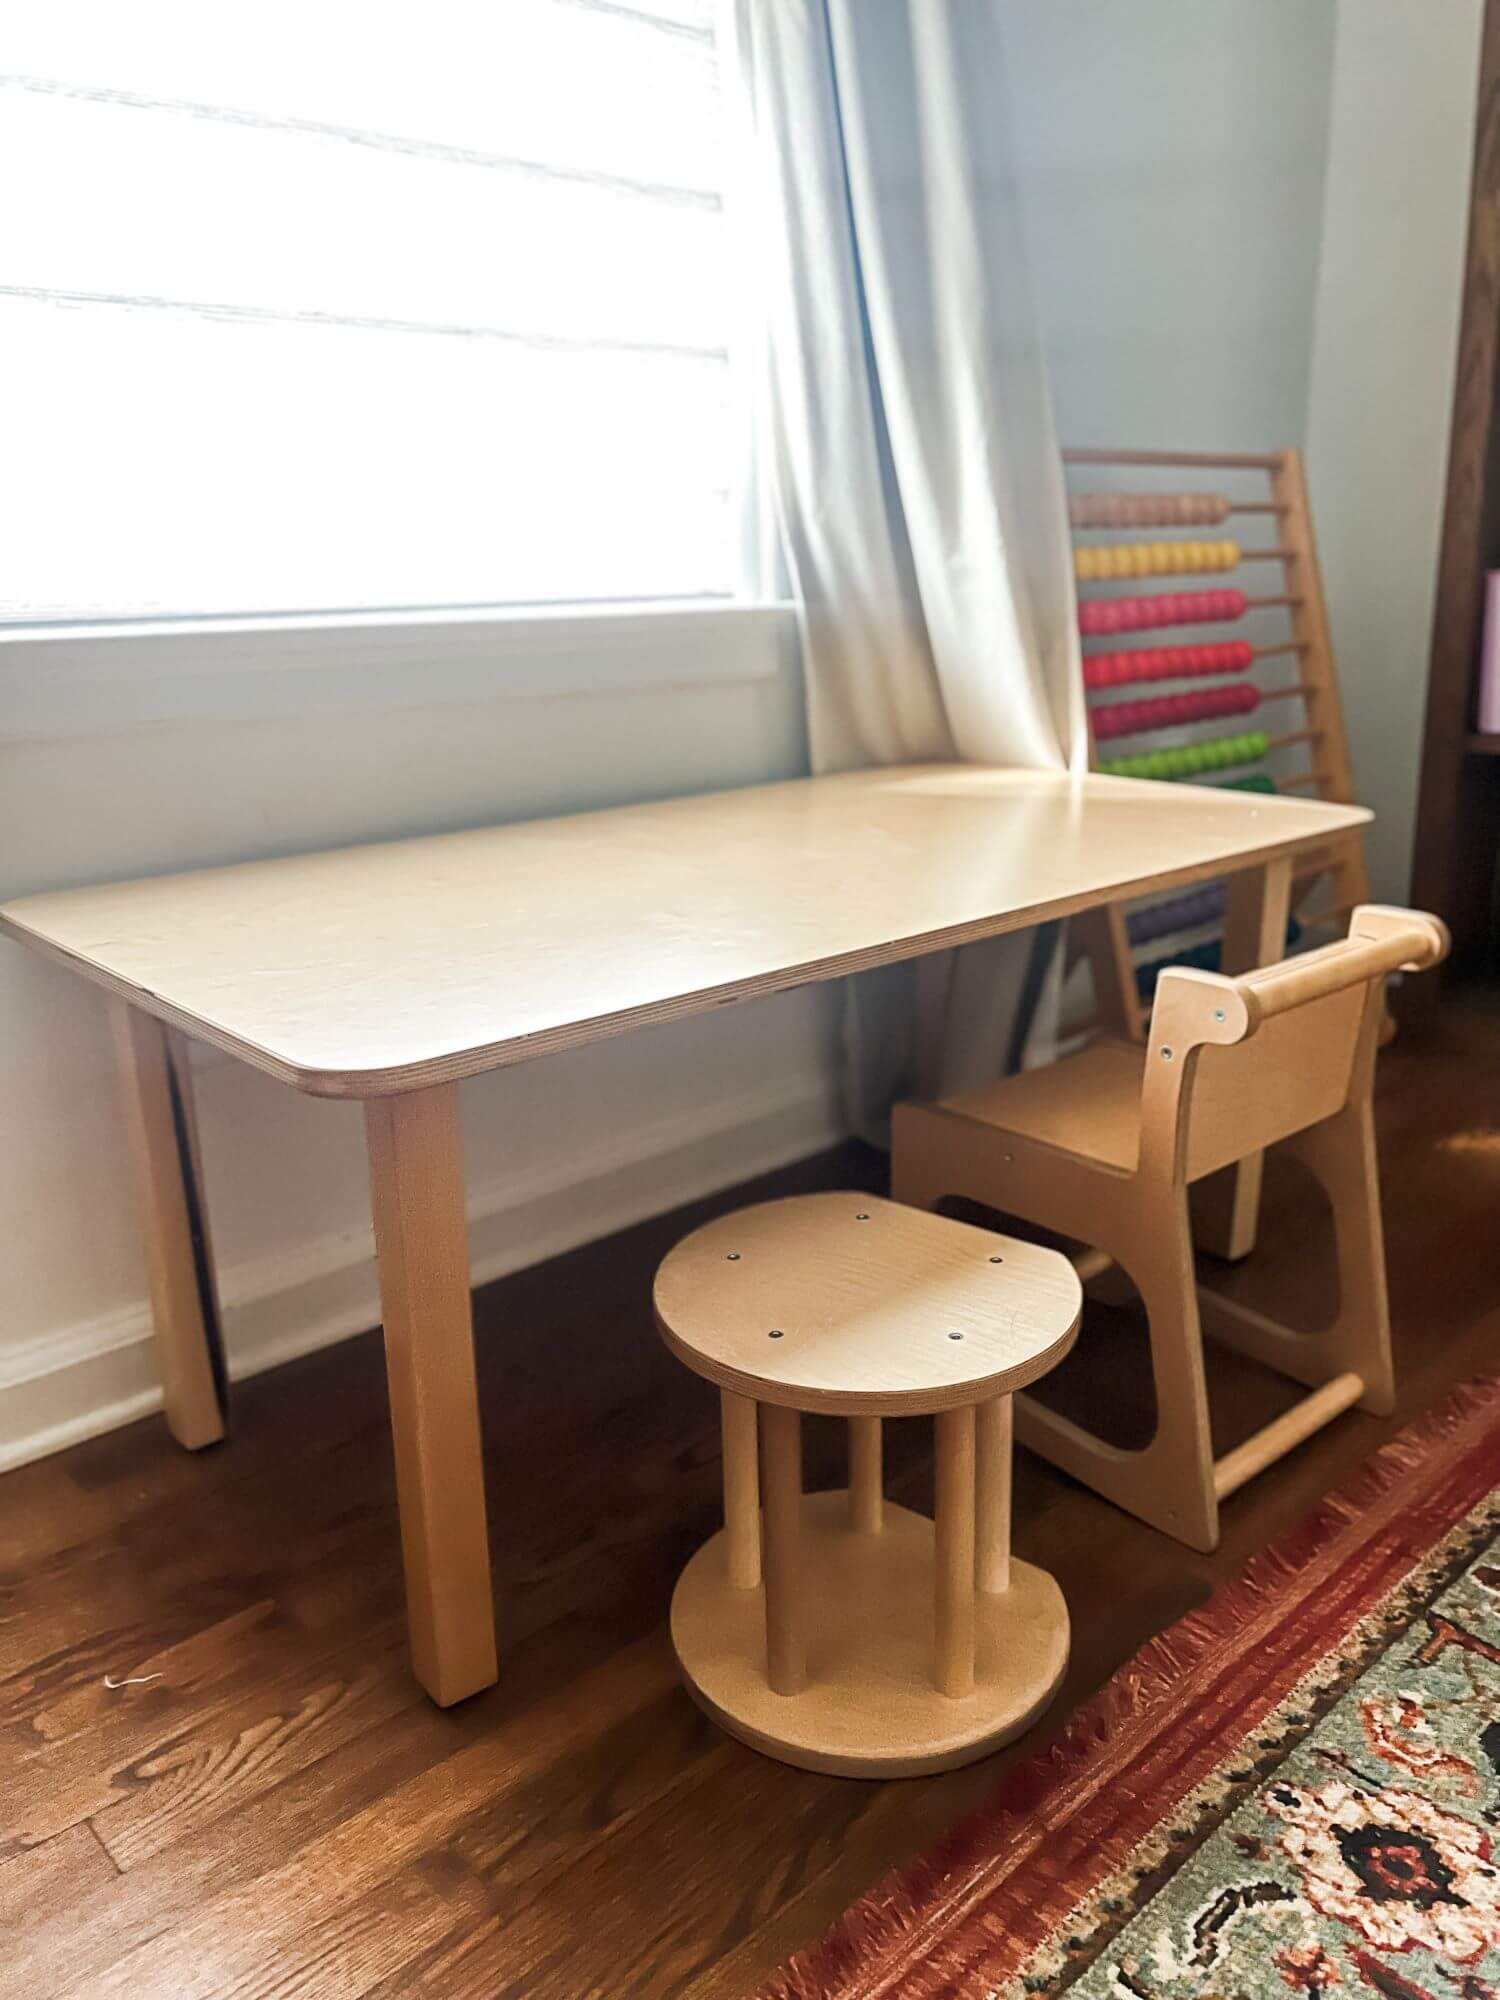 All Four, Six and Eight Seat Toddler Tables Options, Preschool & Daycare  Furniture